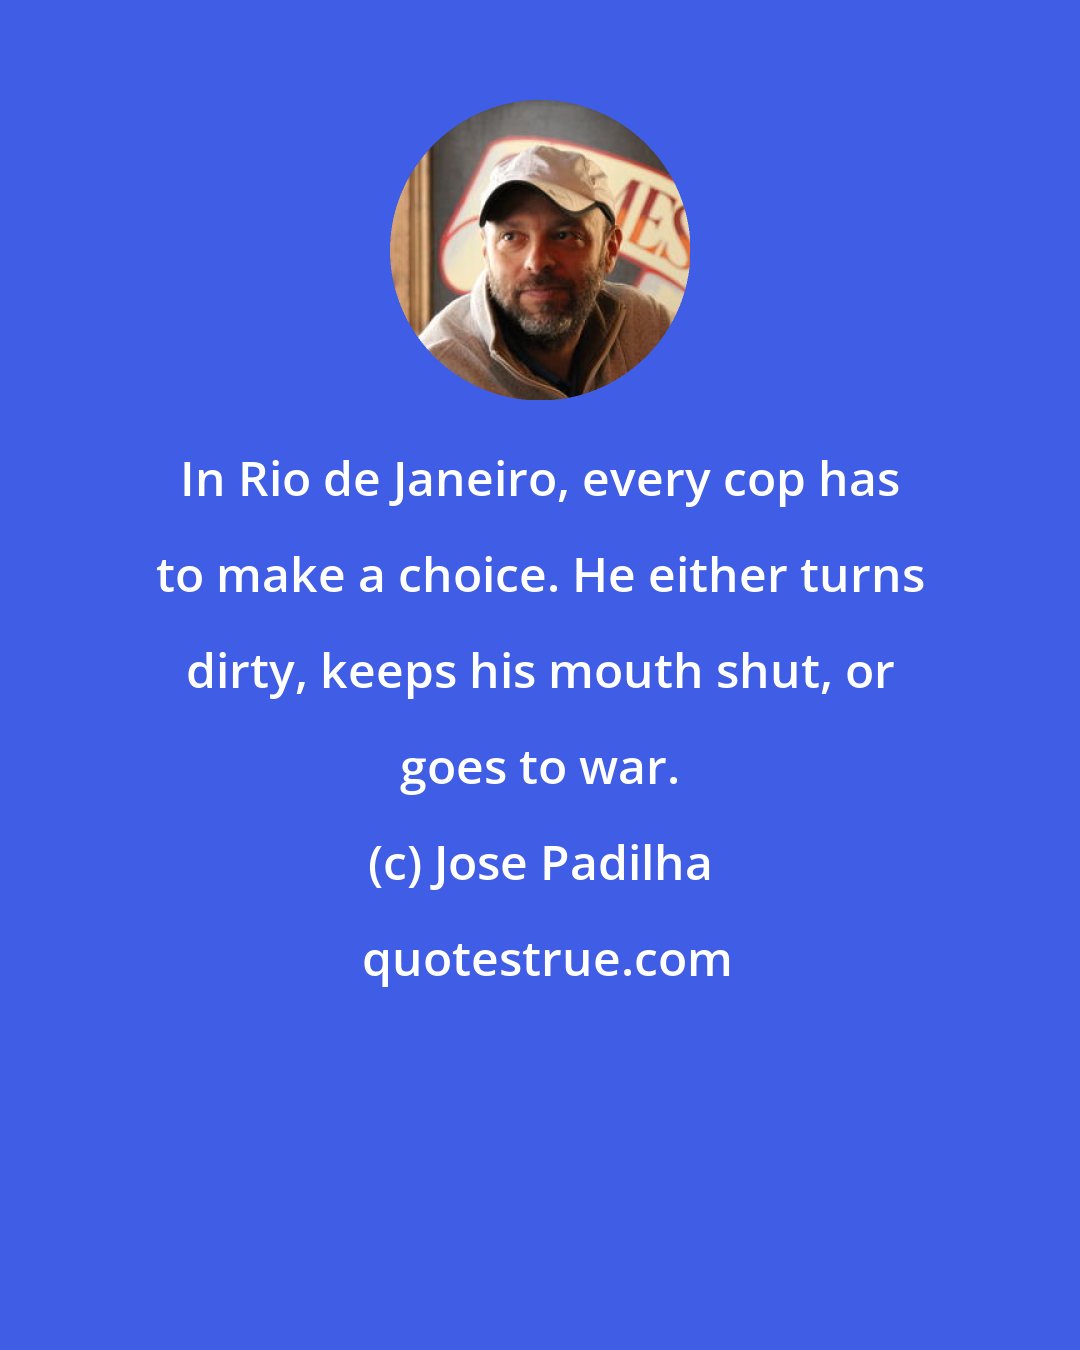 Jose Padilha: In Rio de Janeiro, every cop has to make a choice. He either turns dirty, keeps his mouth shut, or goes to war.